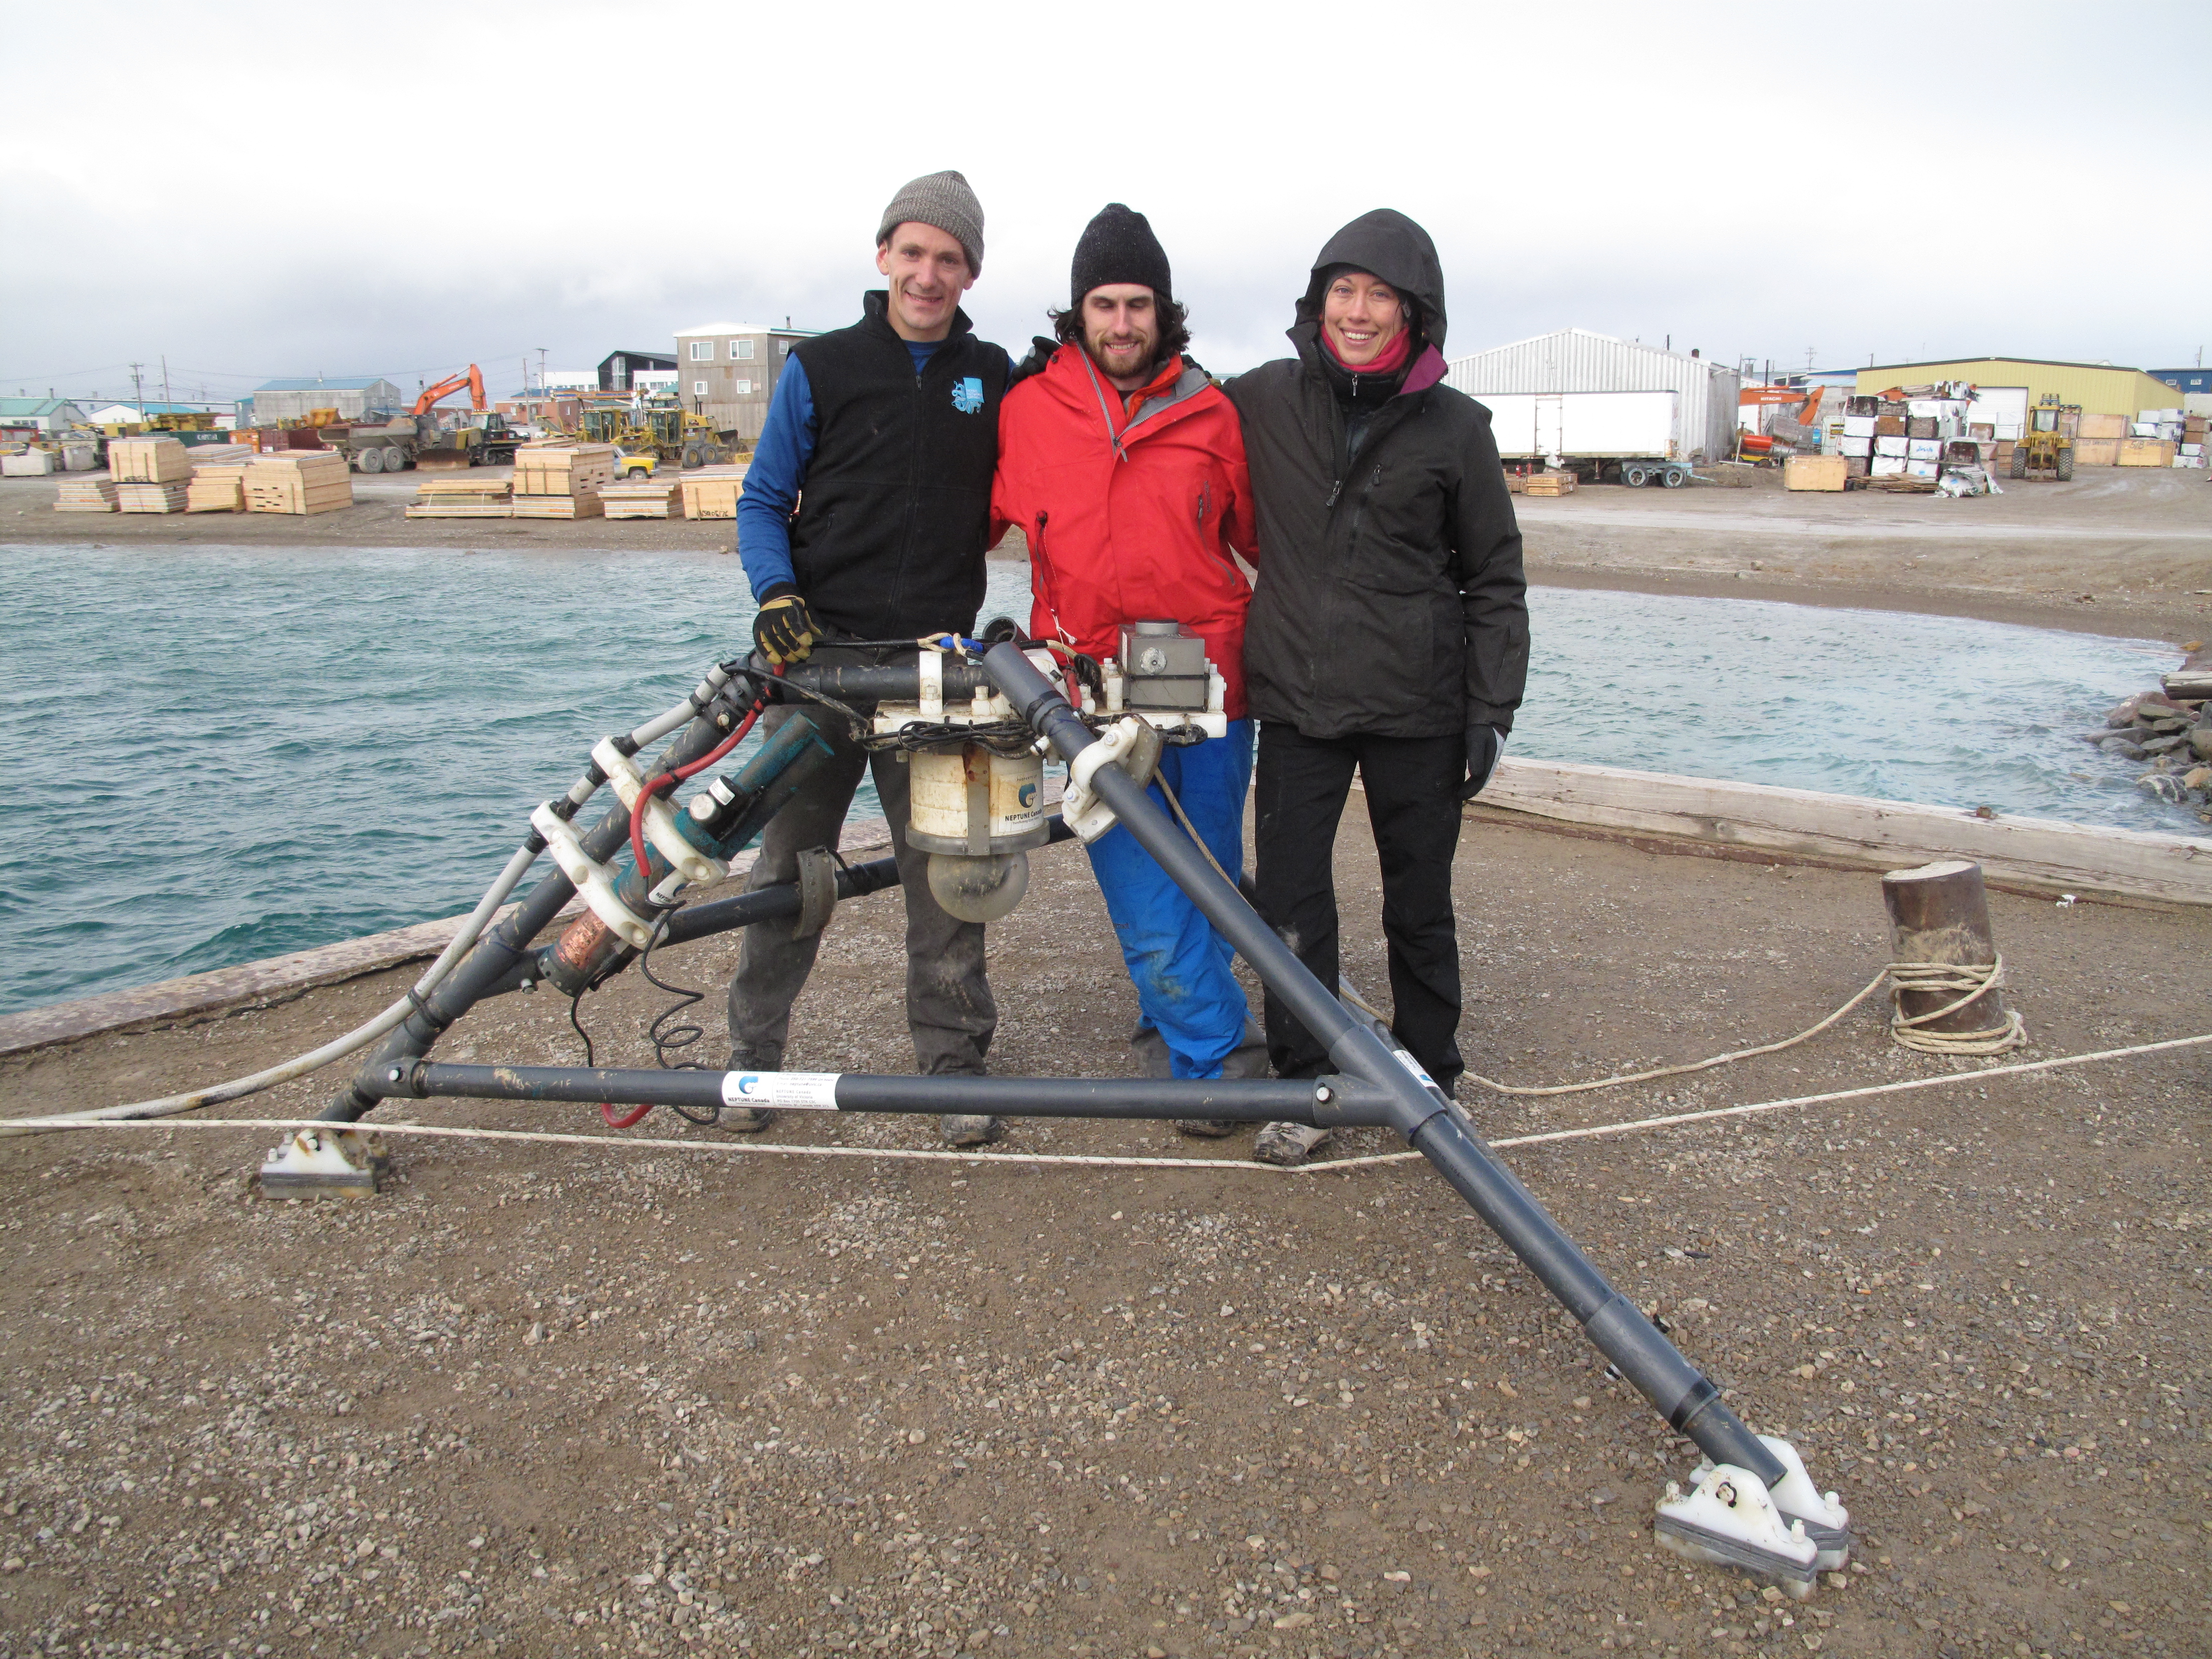 As part of the northern community observatory's first annual maintenance and upgrade, an ONC Science and Engineering team headed north to the Nunavut Hamlet of Cambridge Bay. From left to right: Lead Project Engineer Ryan Flagg, Electrical Technician Ryan Key, and Scientific Data Specialist Alice Bui.